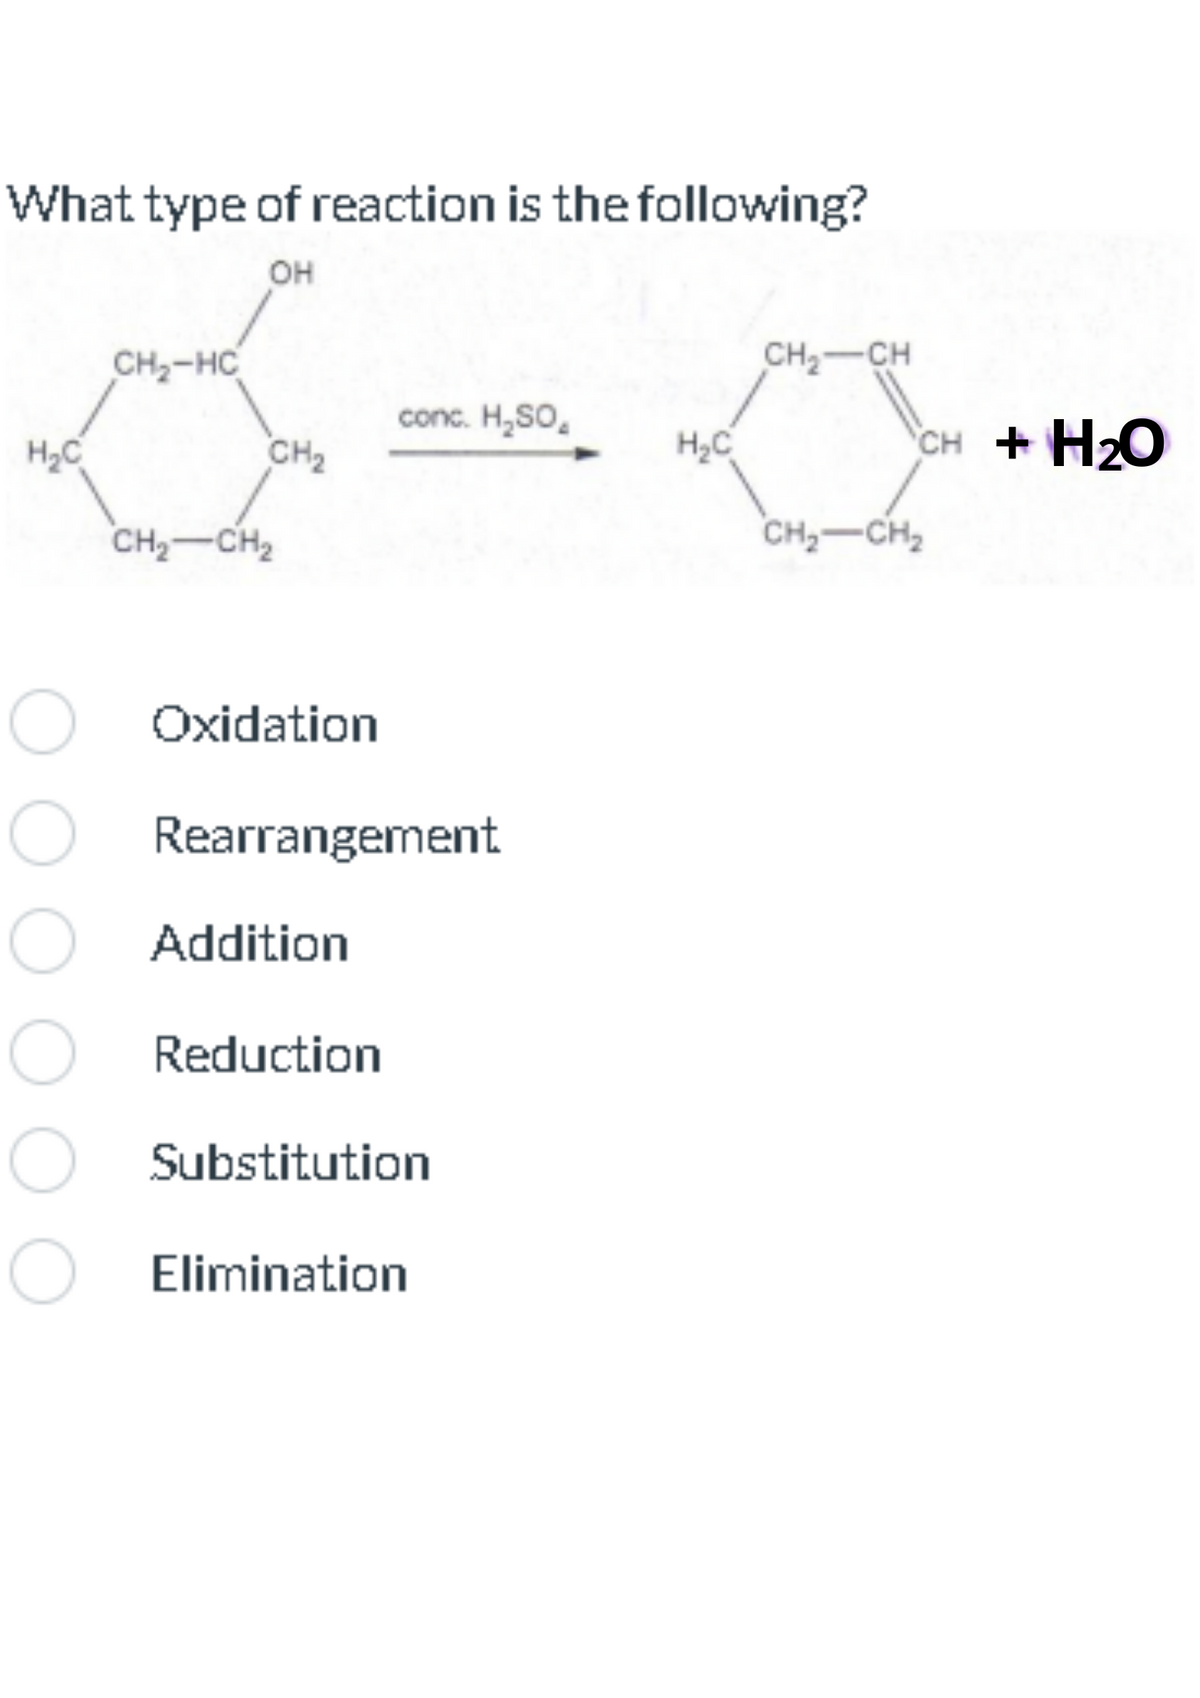 What type of reaction is the following?
OH
H₂C
CH, HỌ
CH₂
CH₂-CH₂
conc. H₂SO₂
O Oxidation
O Rearrangement.
O Addition
O Reduction
O Substitution
O Elimination
H₂C
CH₂-CH
CH + H2O
CH₂ CH₂